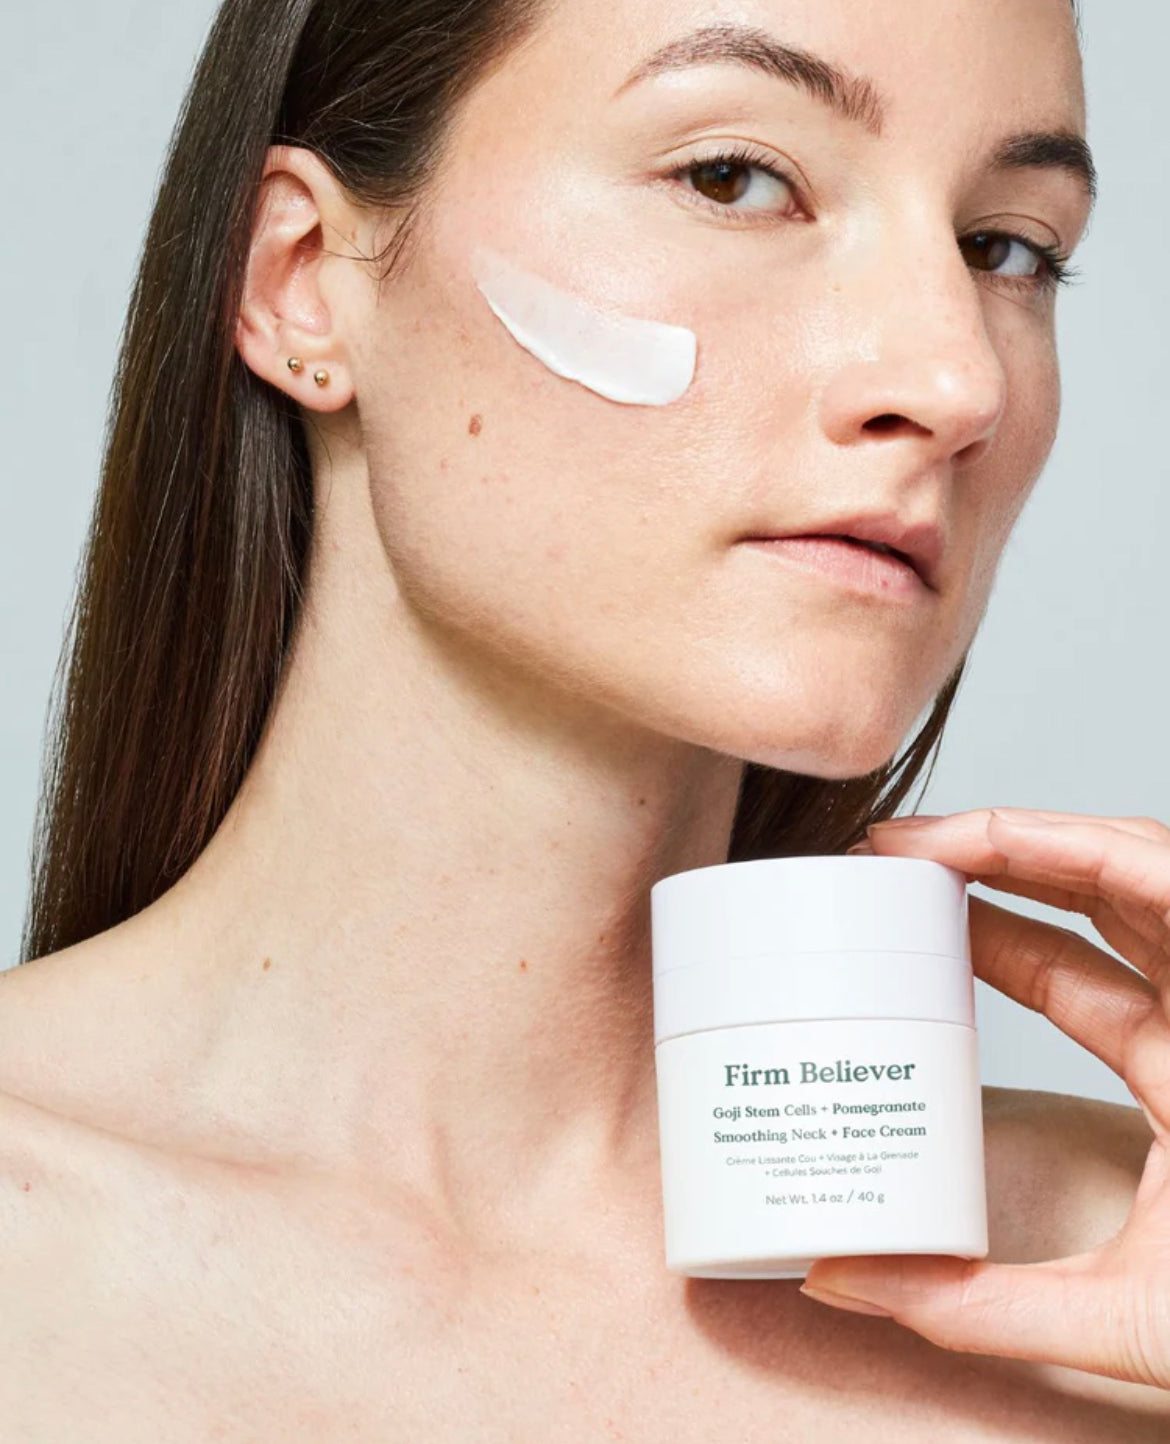 Firm Believer Goji Stem Cell + Pomegranate Smoothing Face and Neck Cream